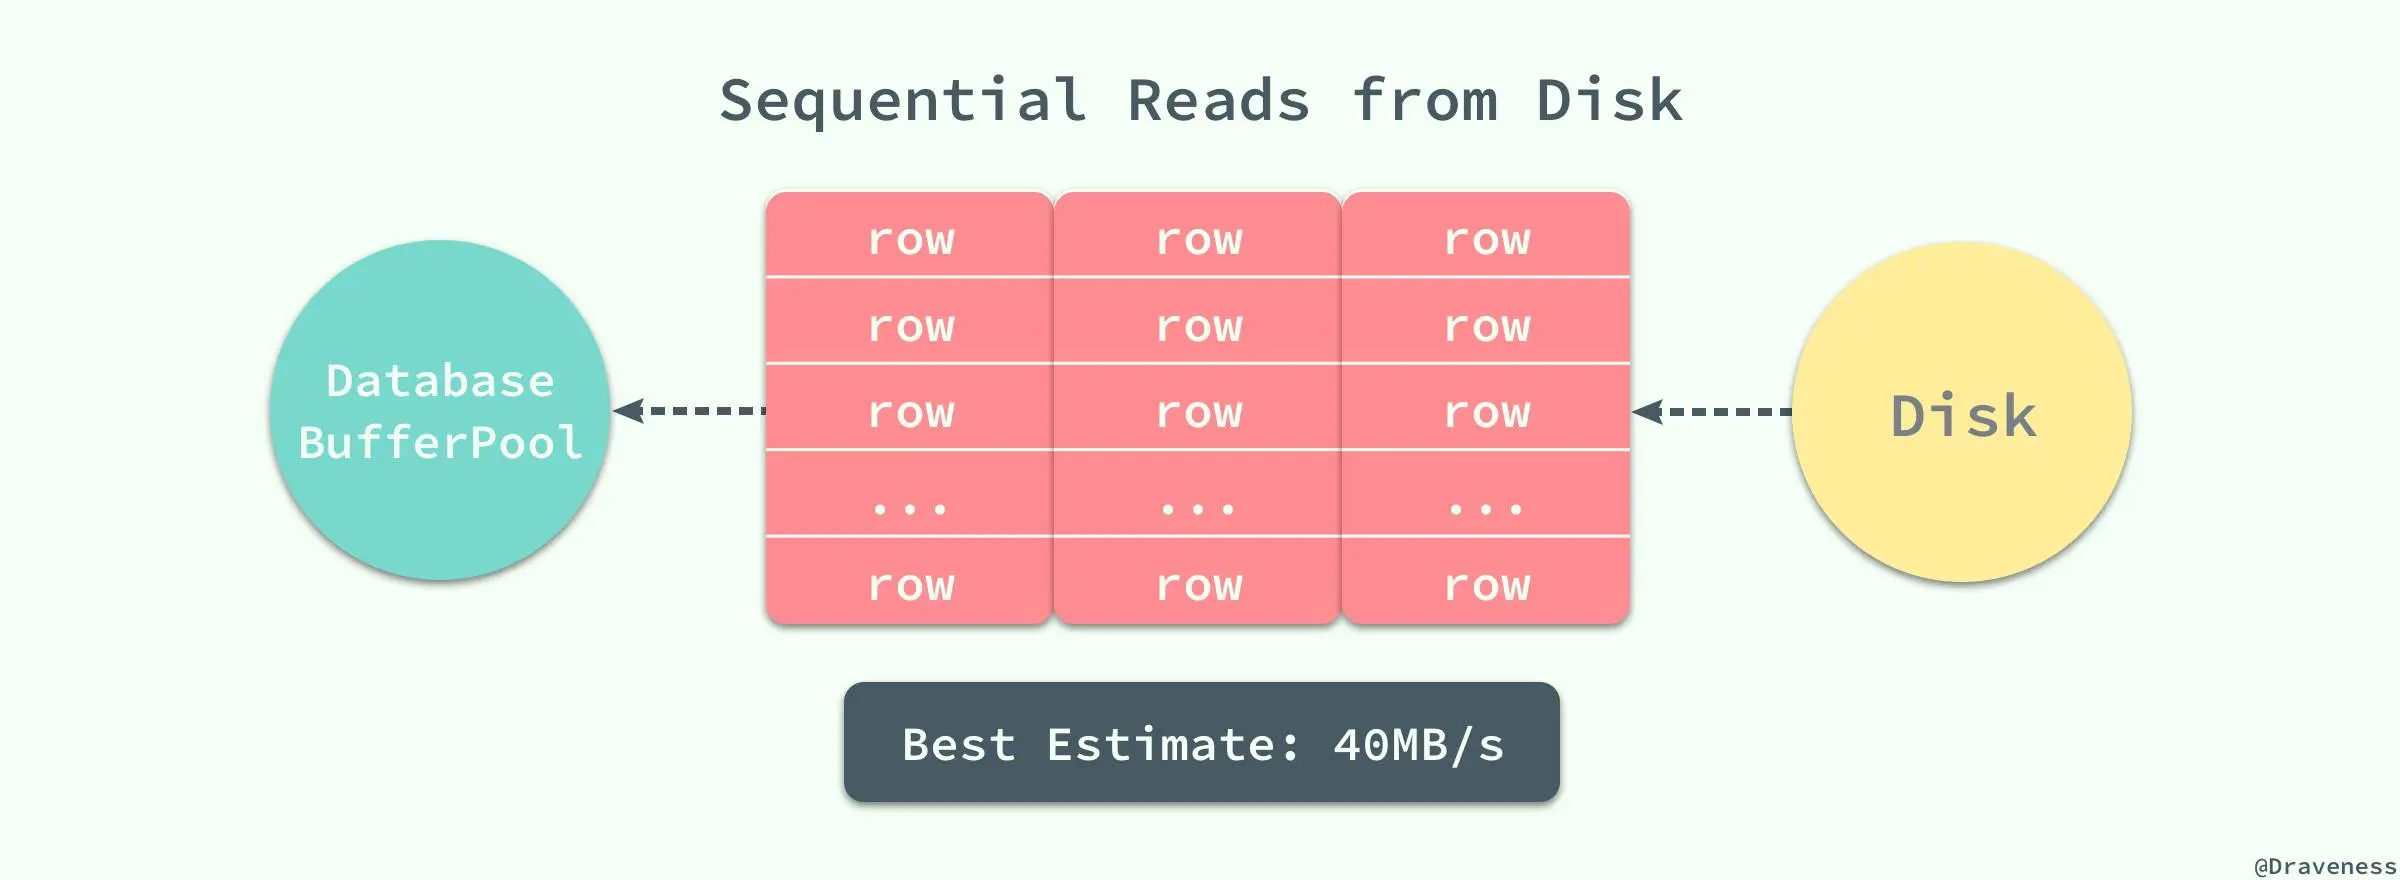 Sequential-Reads-from-Disk